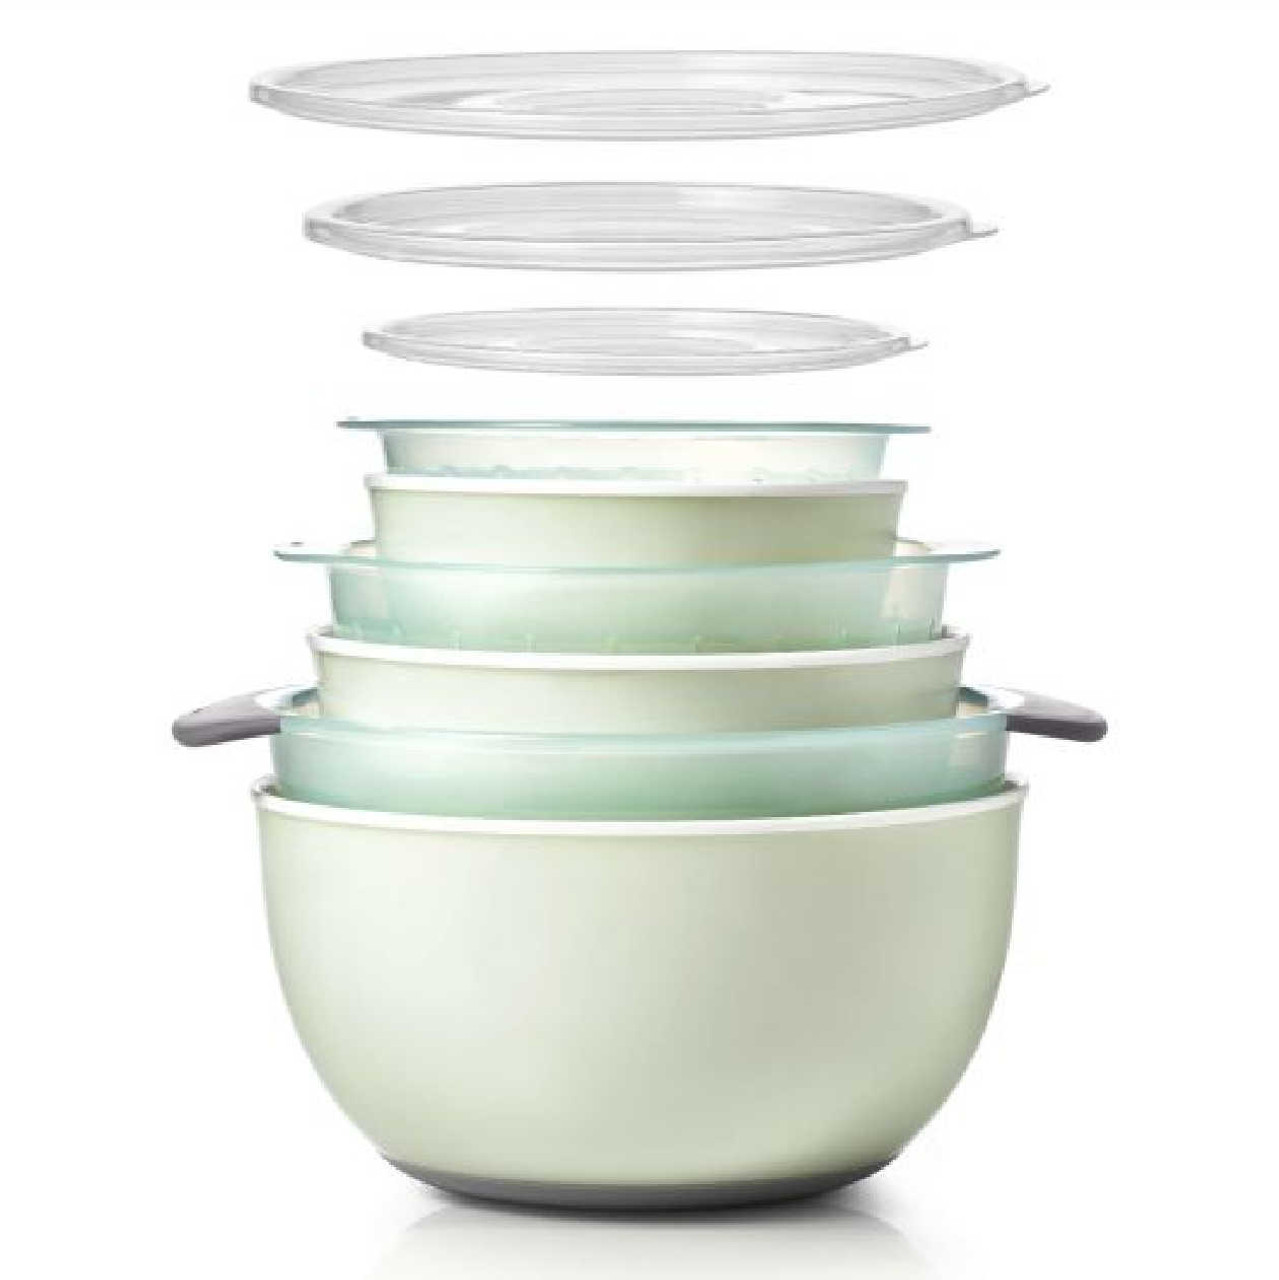 https://cdn11.bigcommerce.com/s-hccytny0od/images/stencil/1280x1280/products/1496/22551/OXO_Good_Grips_9-Piece_Nesting_Bowls_and_Colanders_Set_1__71370.1674070613.jpg?c=2?imbypass=on